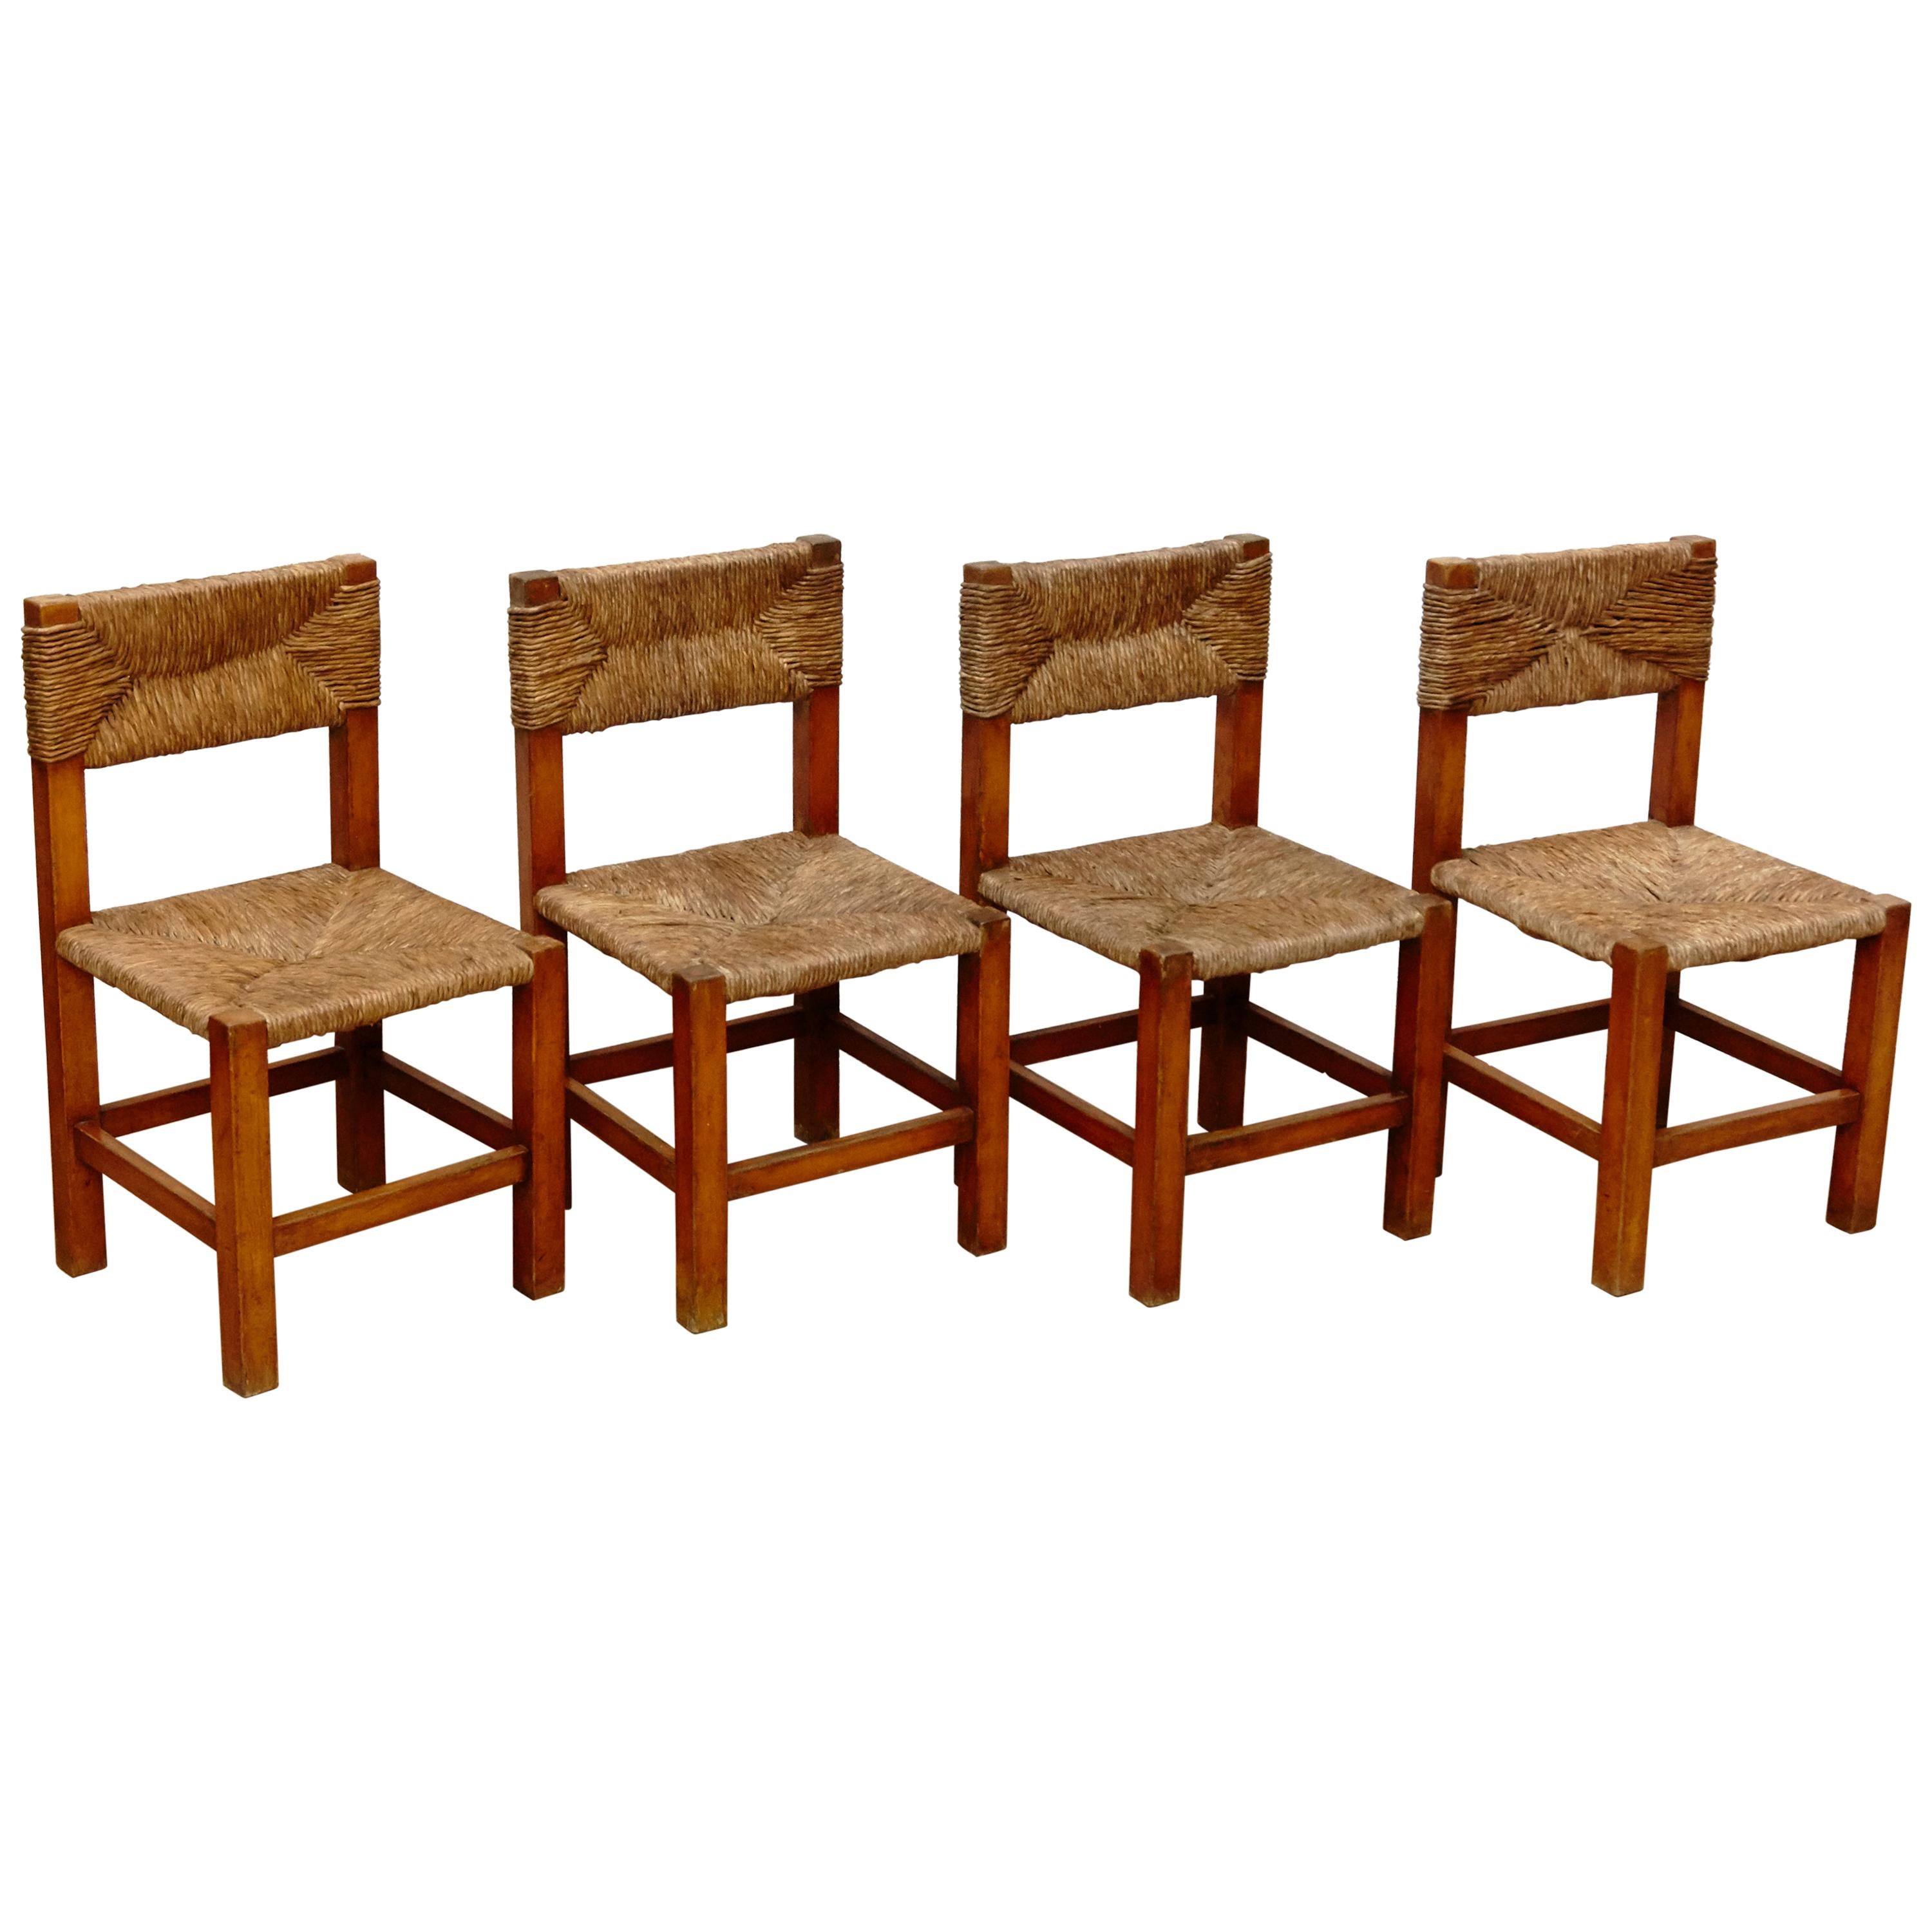 Set of Four Chairs after Charlotte Perriand in Wood and Rattan, circa 1950